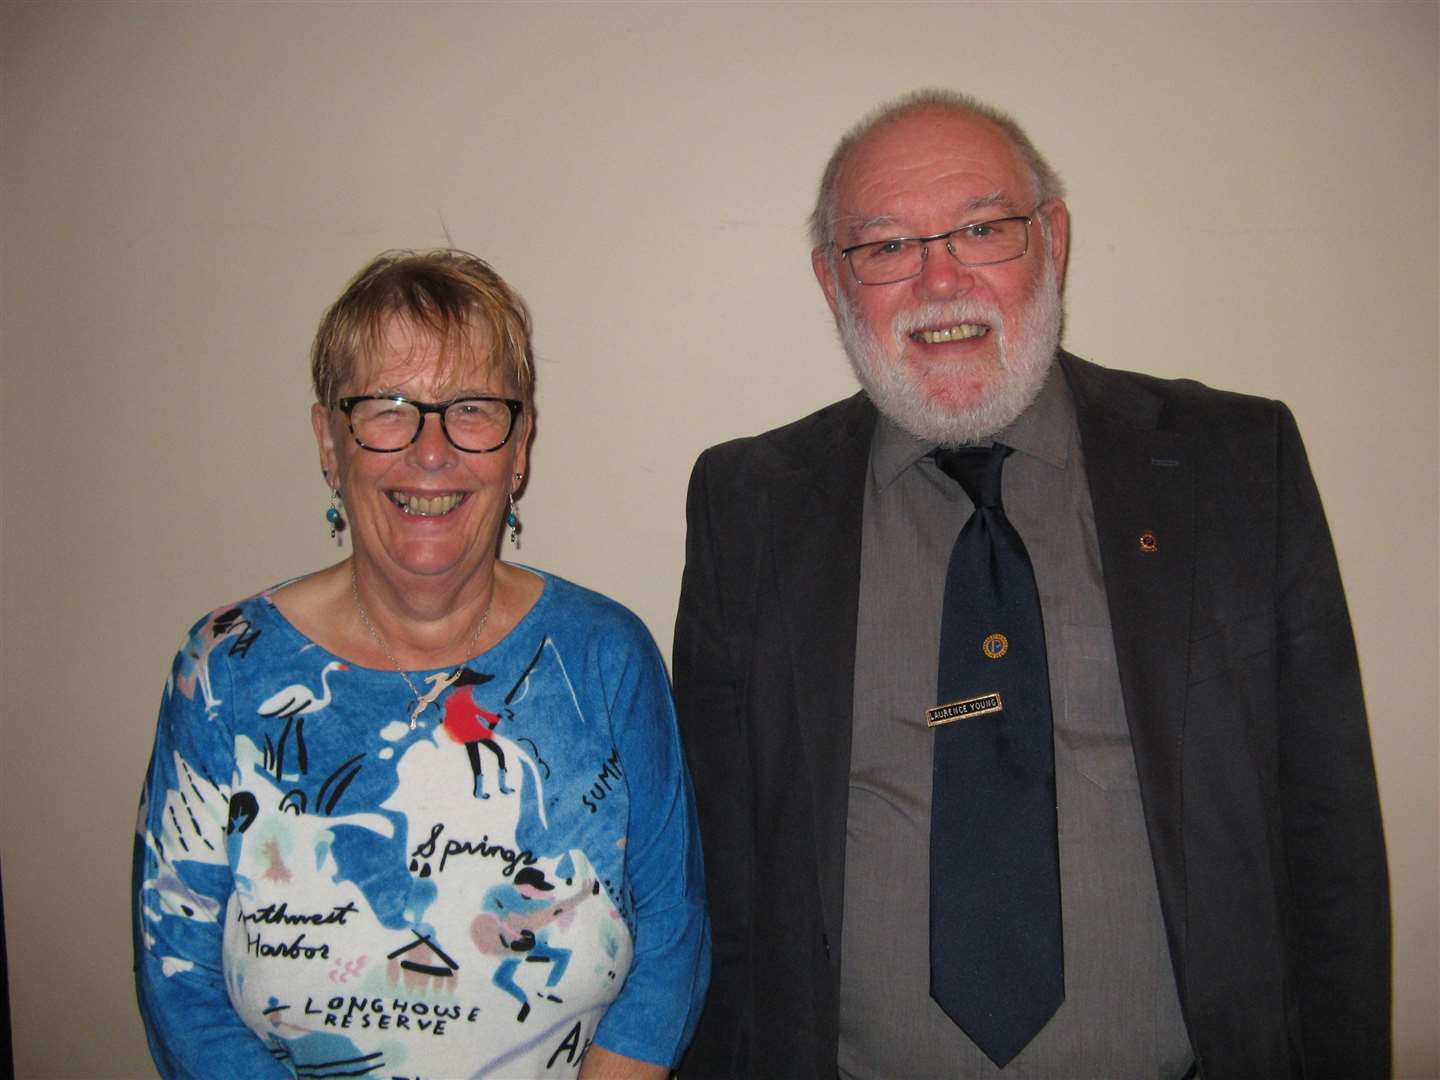 Teacher Valerie Reid, with Stuart Watson, joined other Garioch Probus Club members to discuss teaching abroad.